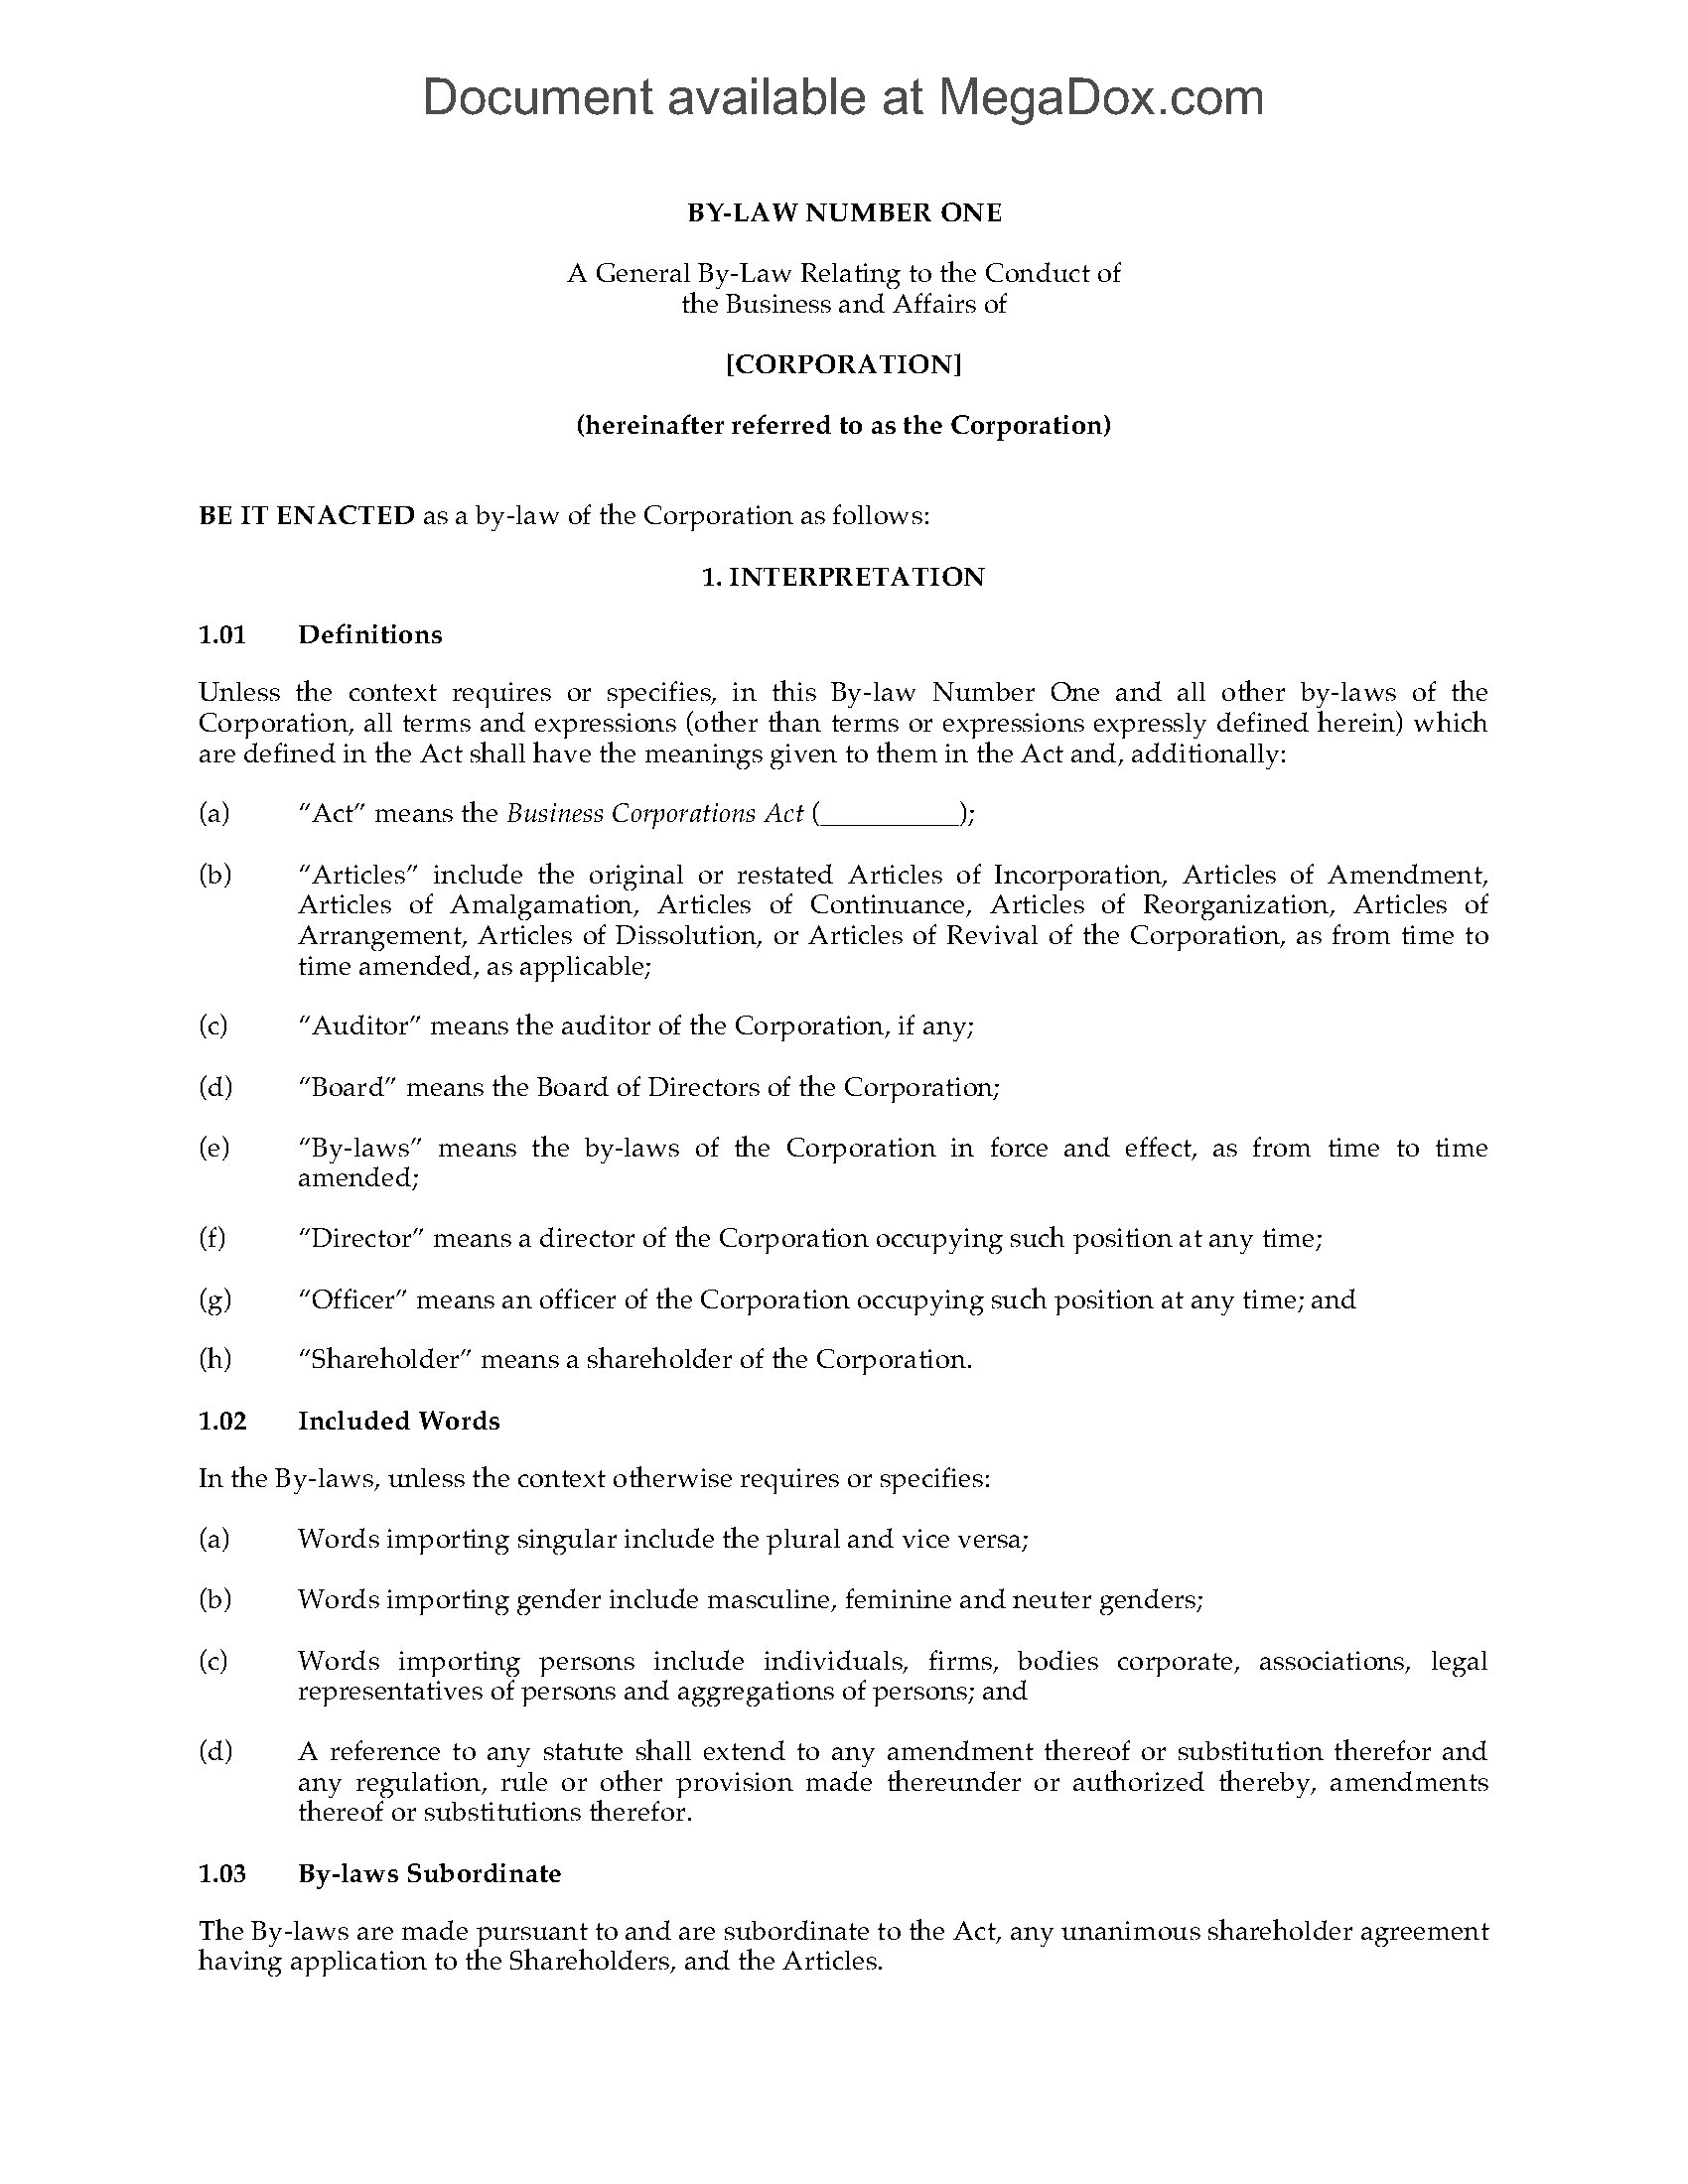 Amendment To Bylaws Template from www.megadox.com